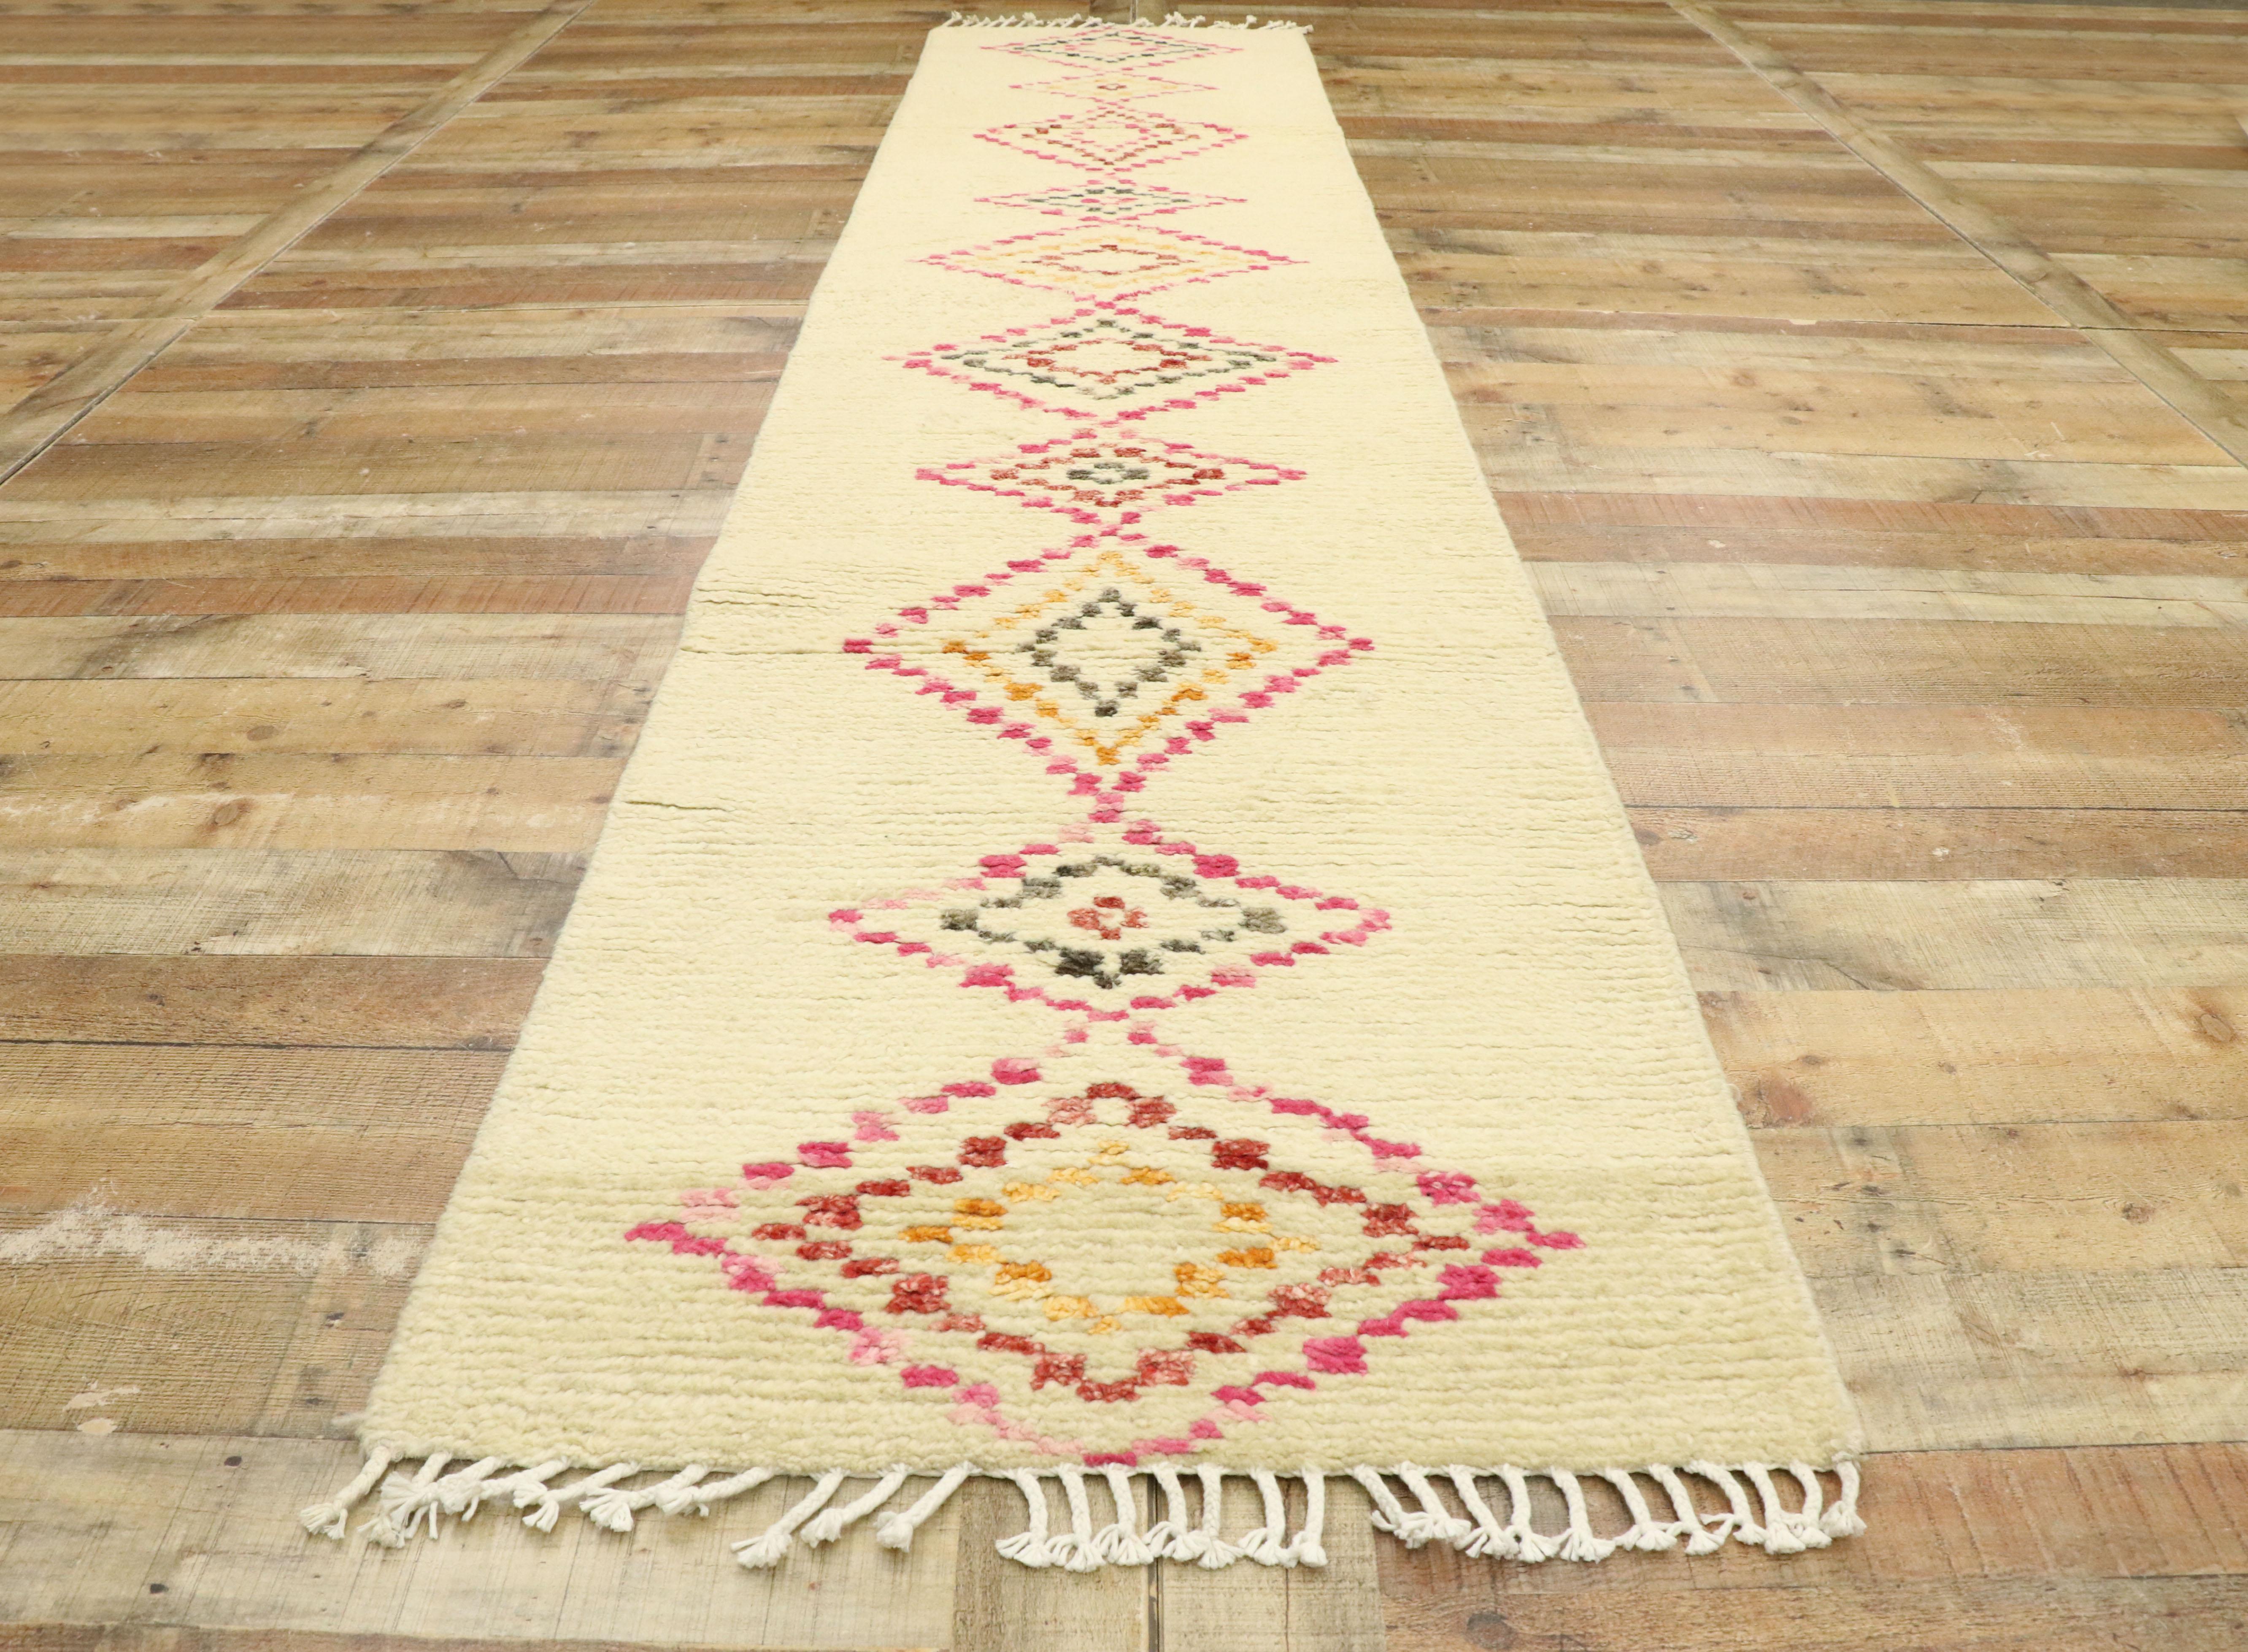 Colorful Moroccan Rug Runner, Boho Jungalow meets Southwest Desert Style For Sale 1